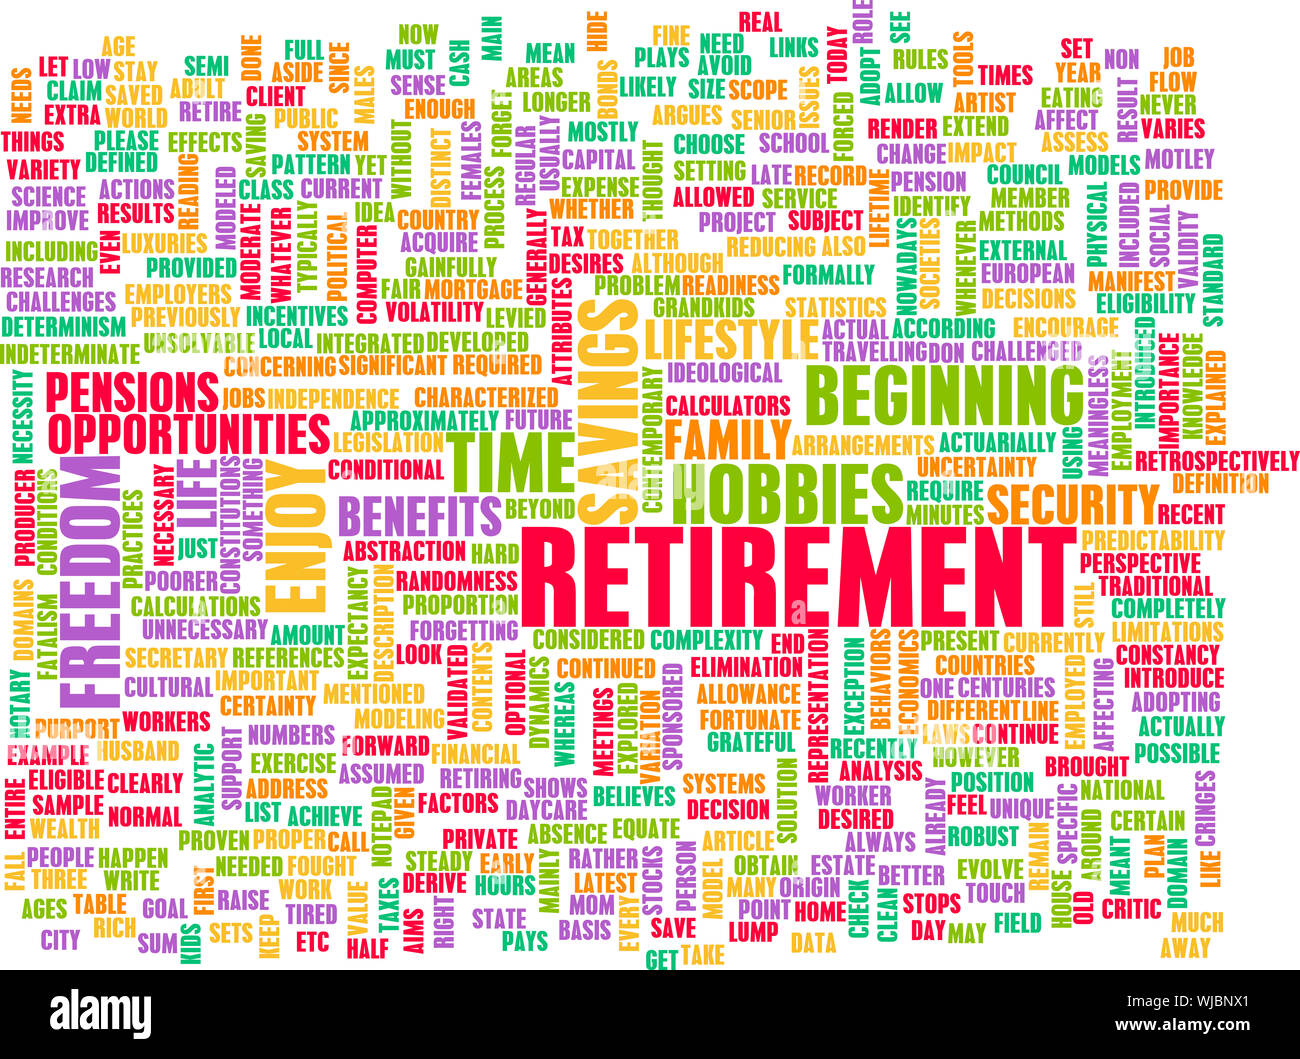 Retirement Planning as a Abstract Concept Stock Photo